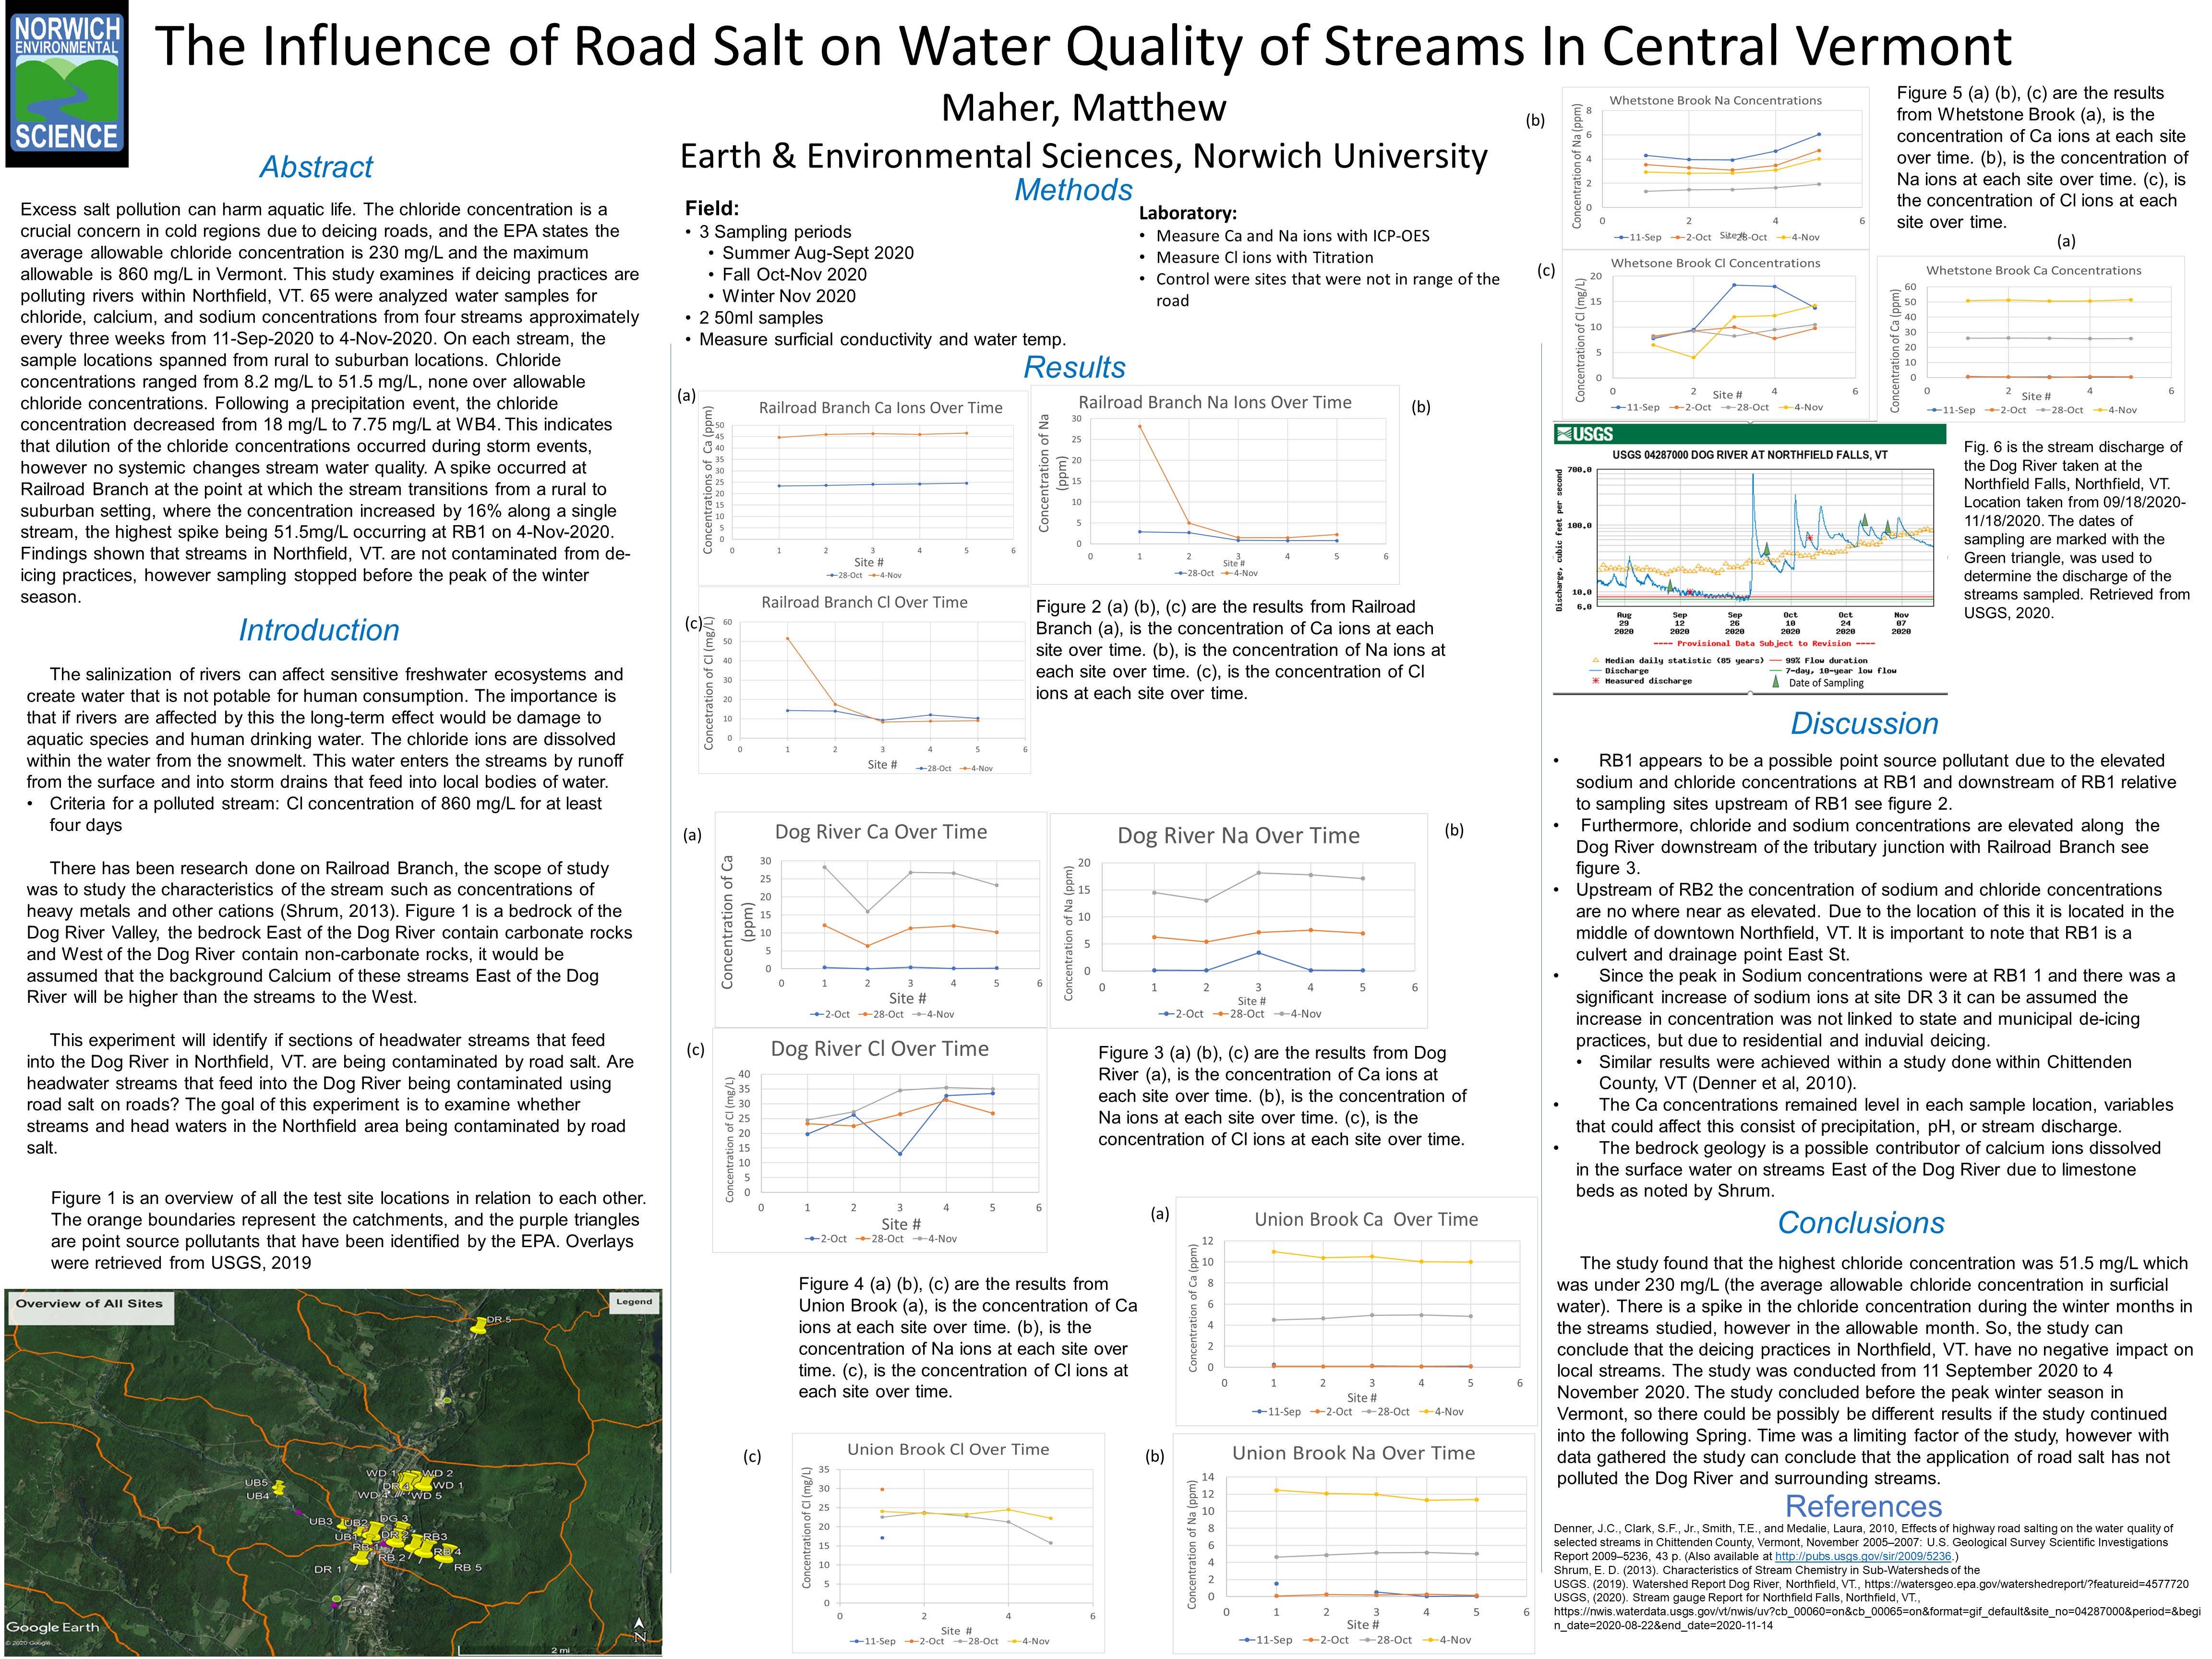 Showcase Image for The Influence of Road Salt on Water Quality of Streams in Central Vermont